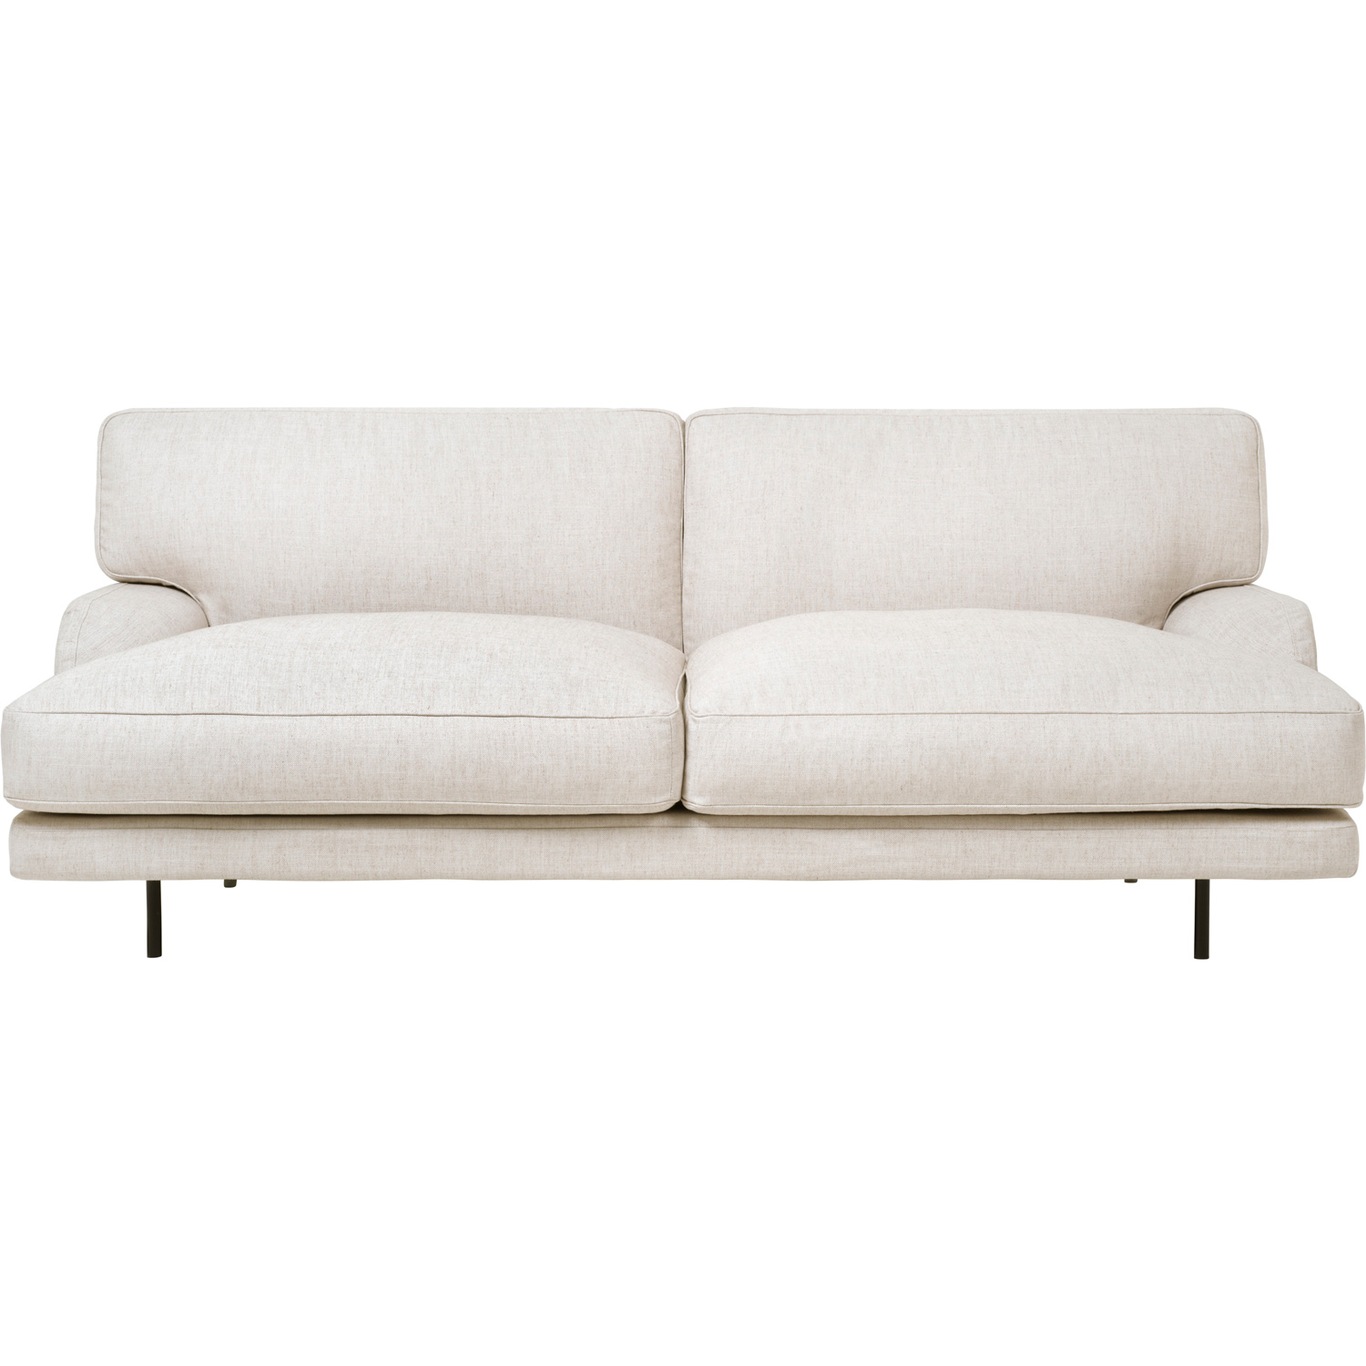 Flaneur Sofa FC 2-Pers, Ben Sort / Hot Madison 419 Off White